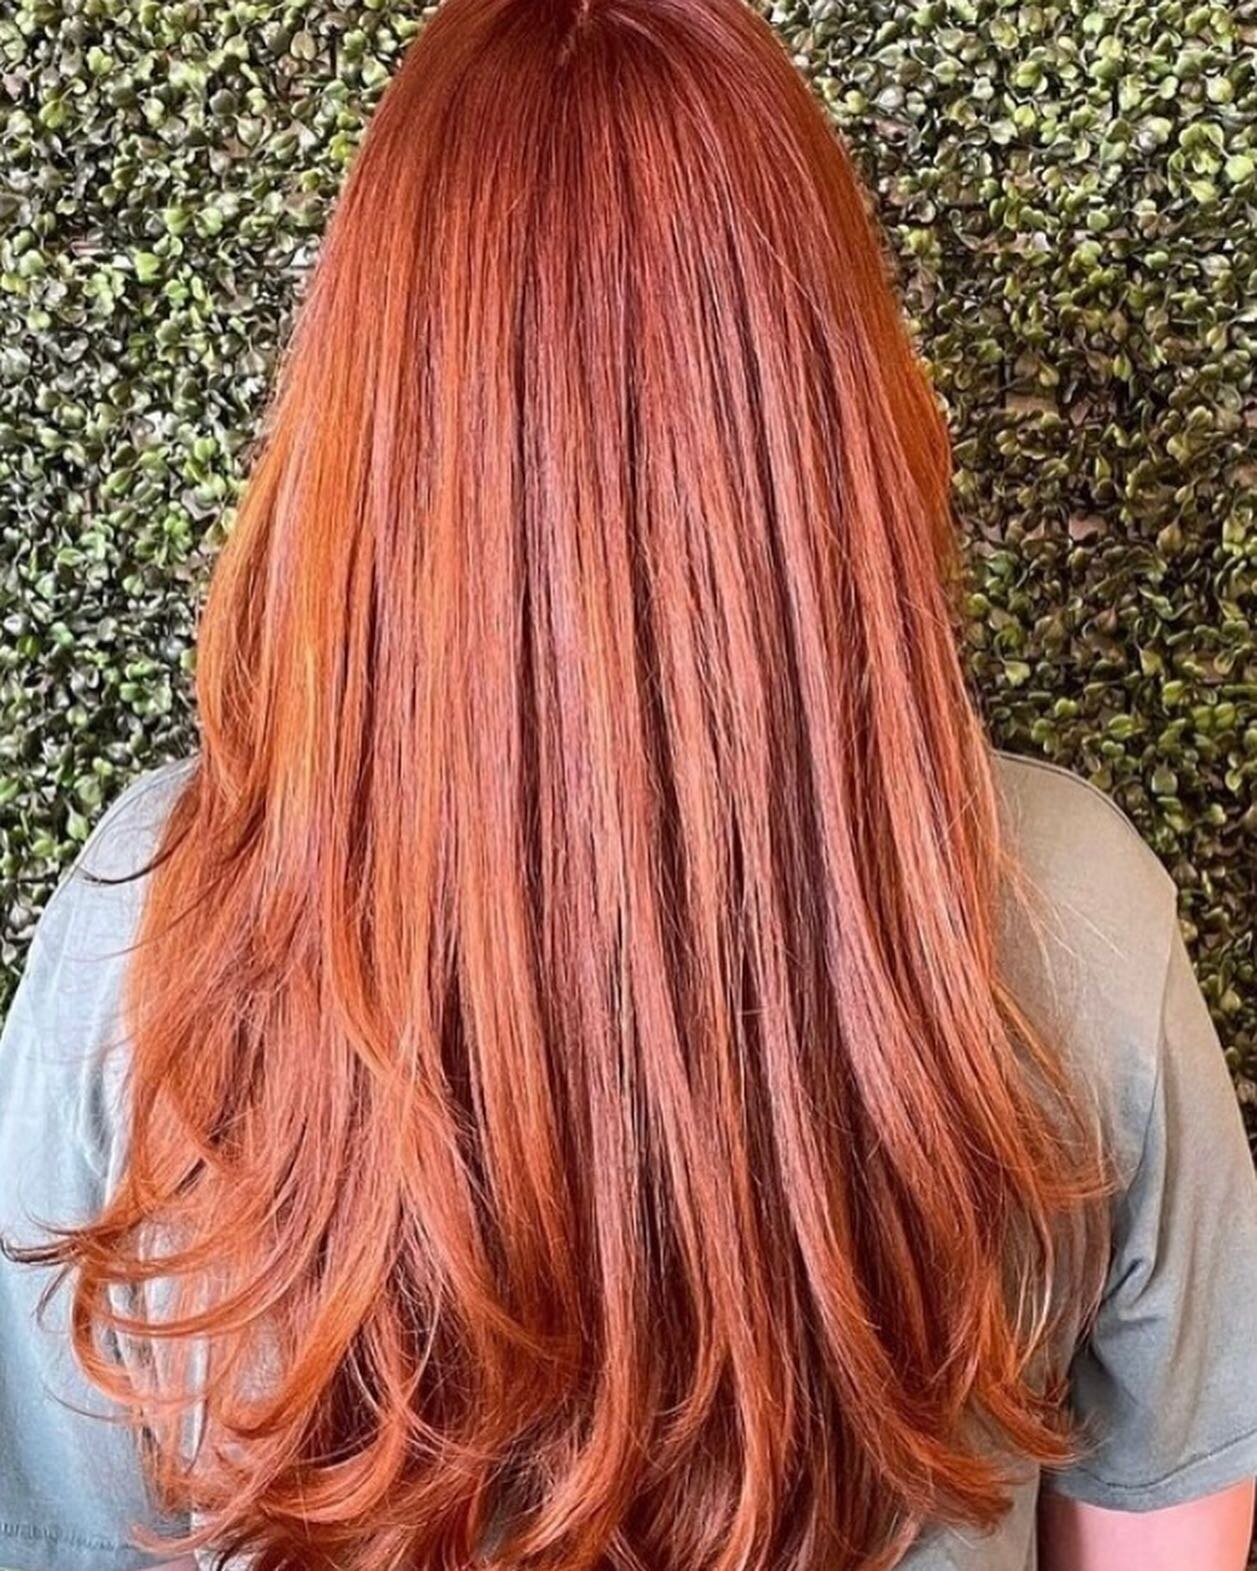 Beautiful copper hair done by our stylist @dollhairsbydanielle🧡✨

For appointments: 📞(407)864-2587
.
.
.

#vamphairsalon #VAMPHAIR #orlandohairstylist #downtownorlandosalon #blondewaves #copperbalayge #orlandofoilage #shopsmallbusiness